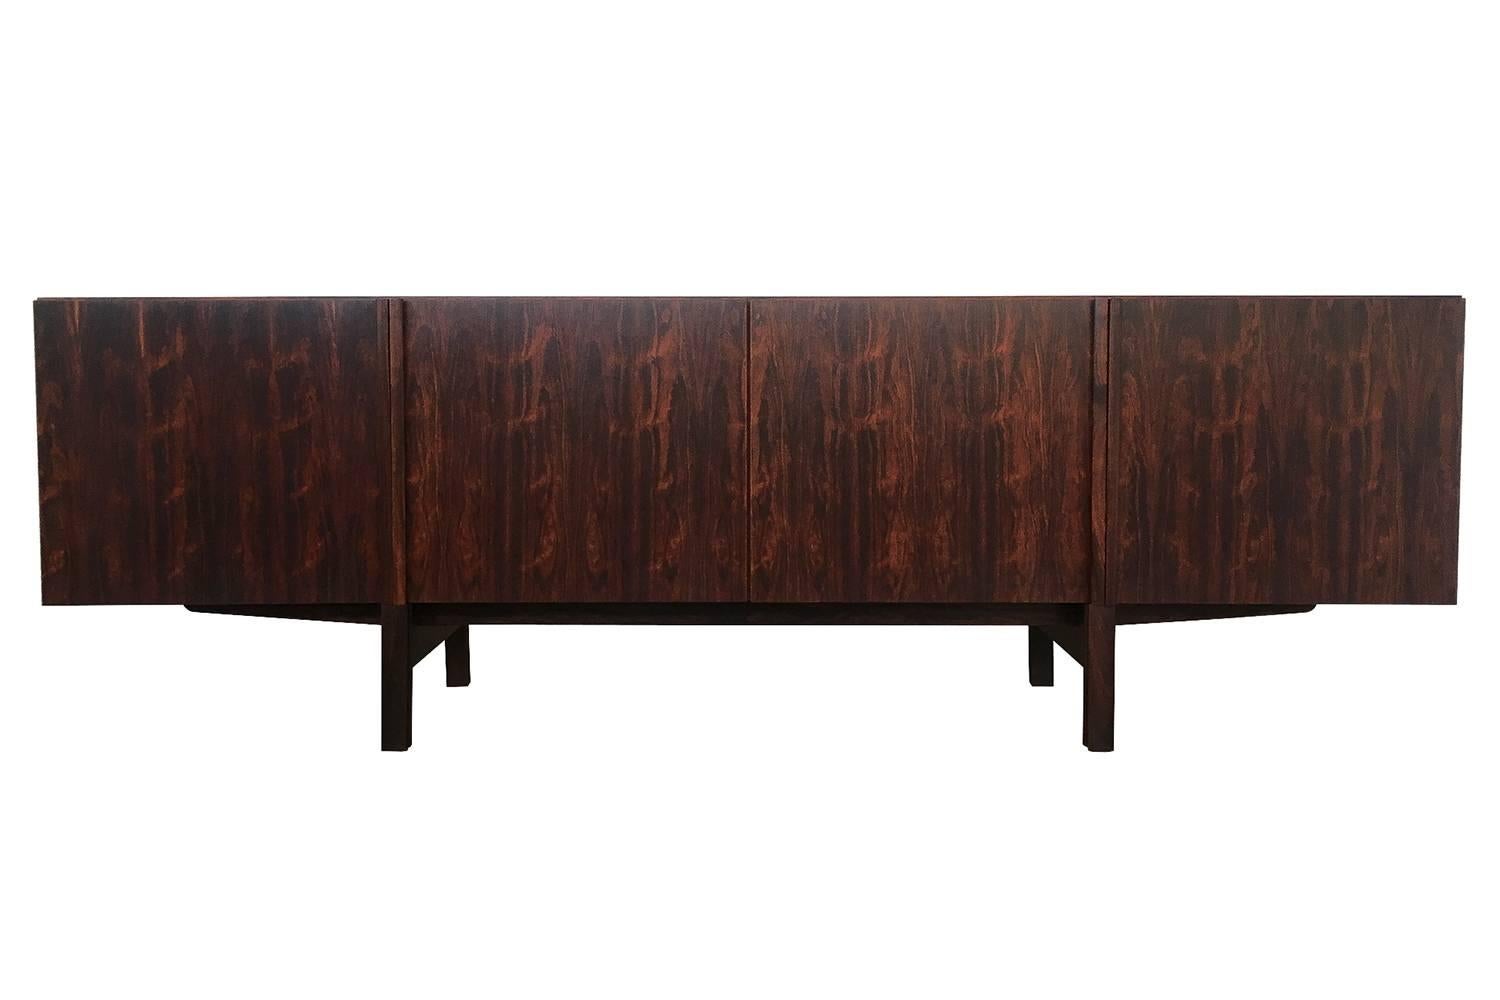 Rosewood sideboard or credenza by Ib Kofod Larsen for Faarup Mobelfabrik, circa 1960s. Featuring four hinged doors with carved rosewood handles that visually integrate vertically into the legs. The interior of the cabinet has four rosewood felt